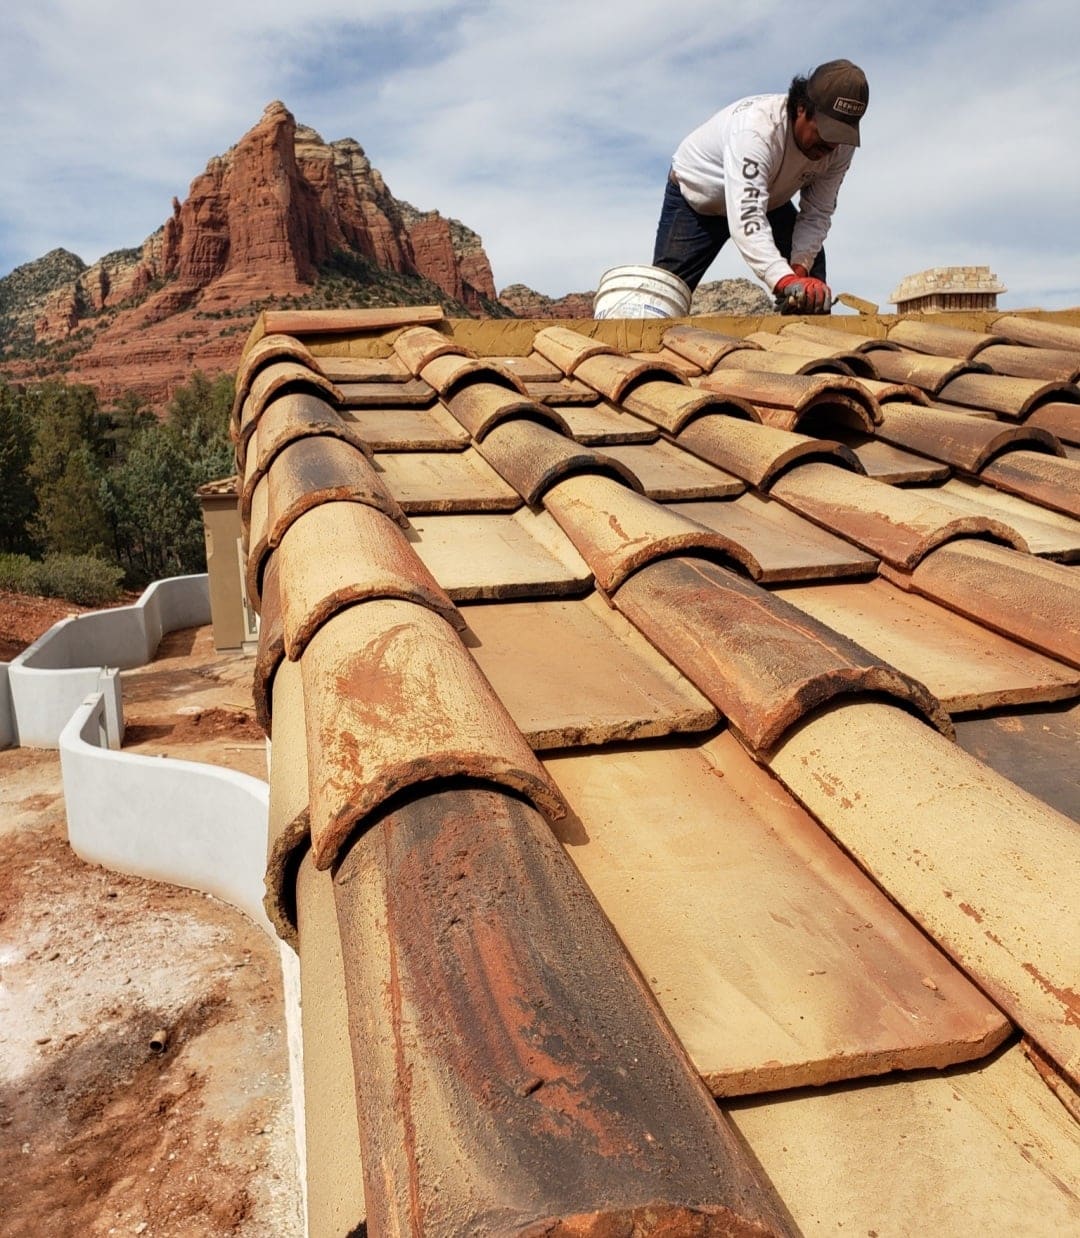 Desert Ridge roofing specialist aligning tiles with precision.